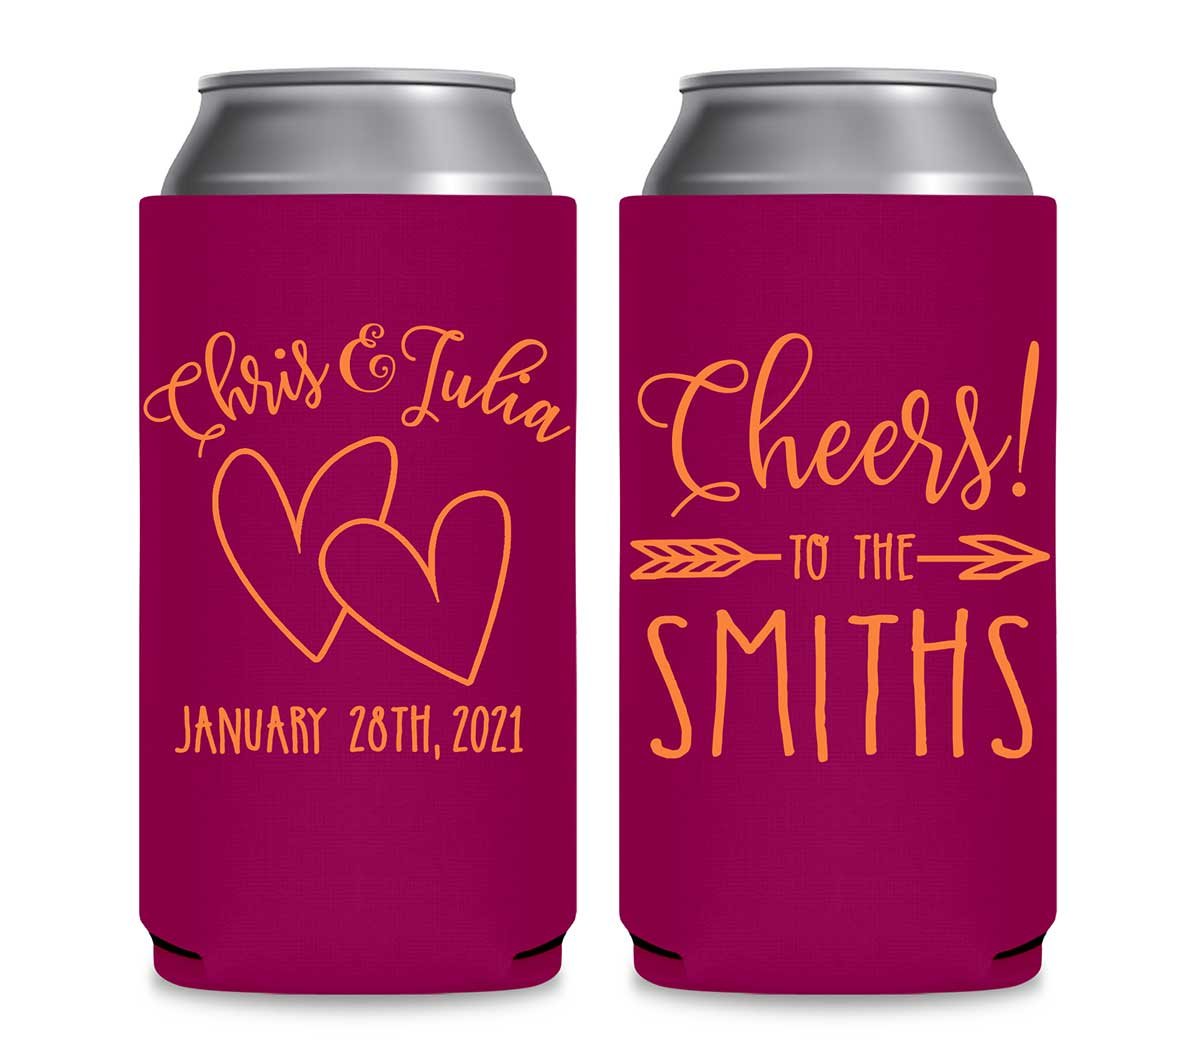 Intertwined Hearts 4B Cheers Foldable 12 oz Slim Can Koozies Wedding Gifts for Guests